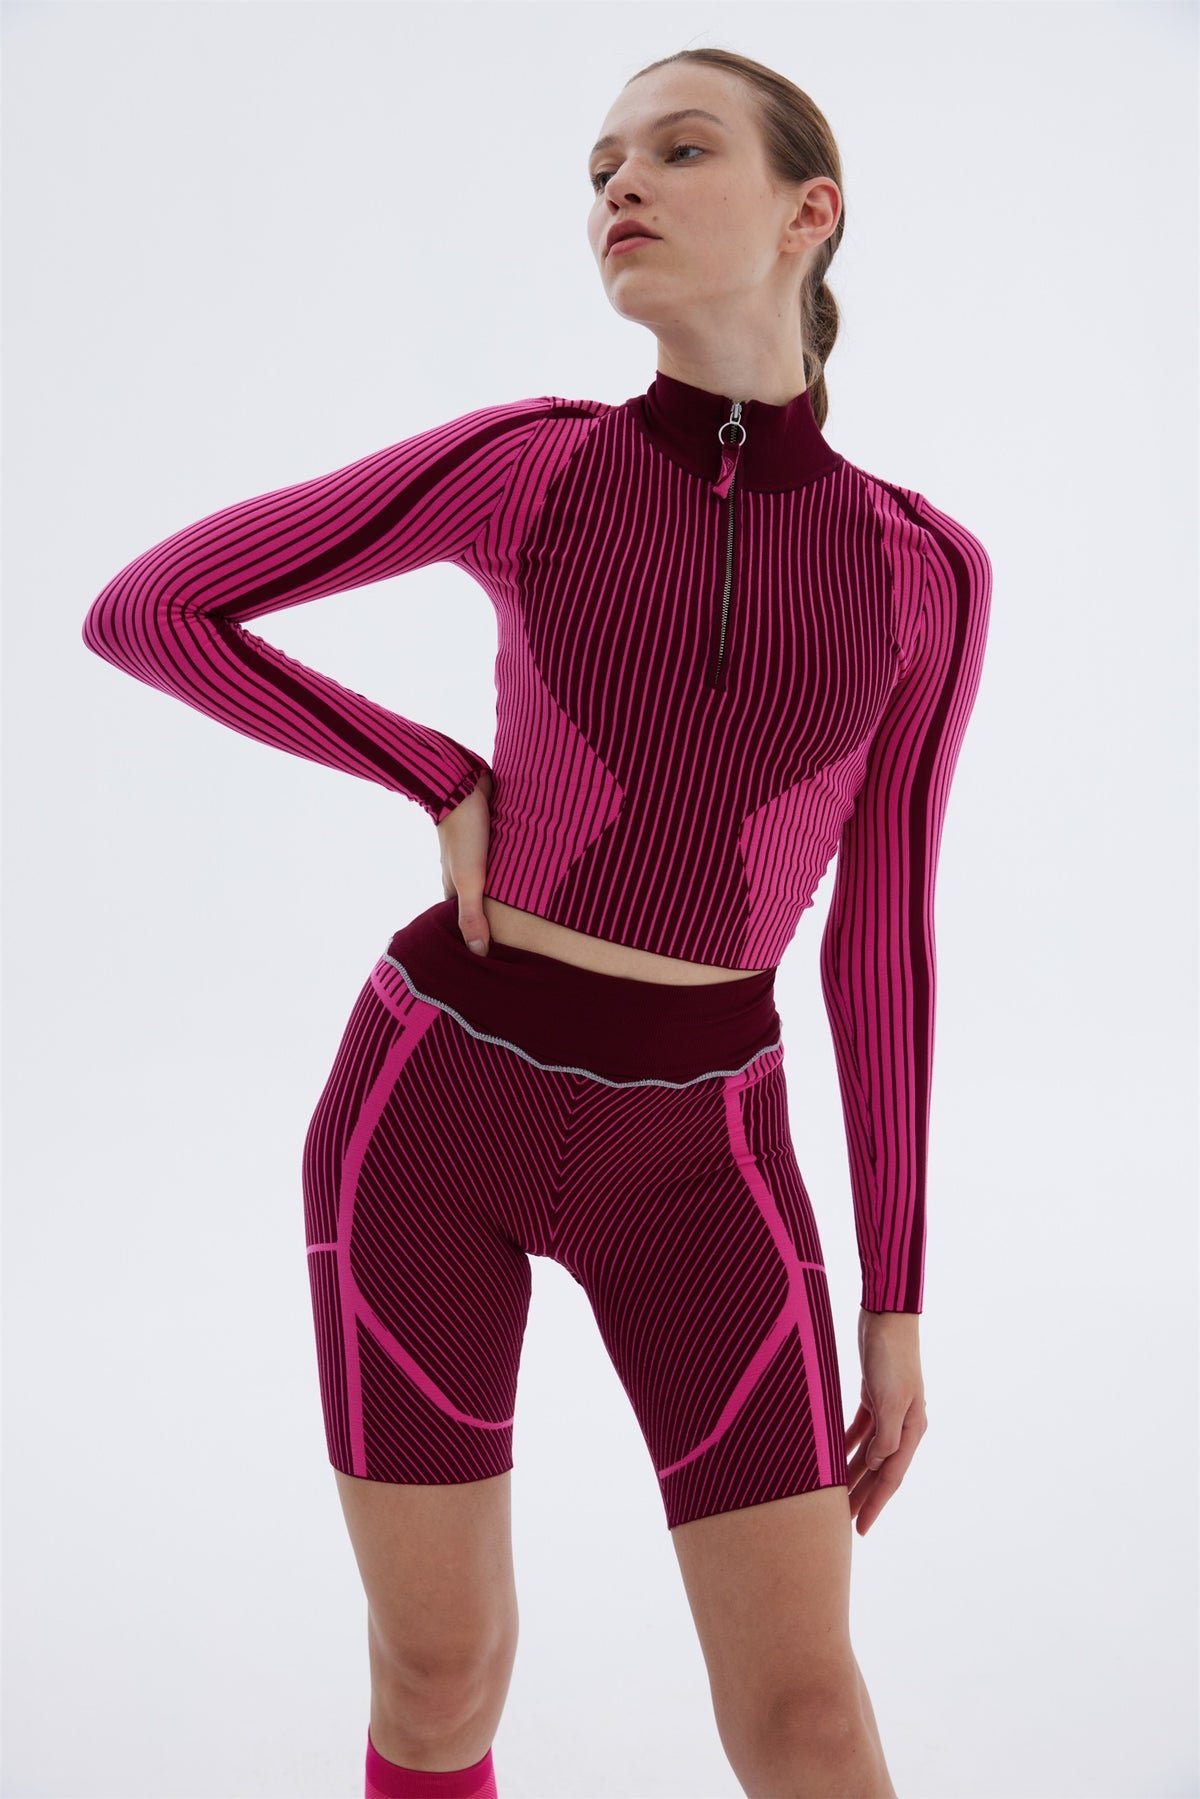 MISBHV Sport  Active wear, Sports activewear, How to wear